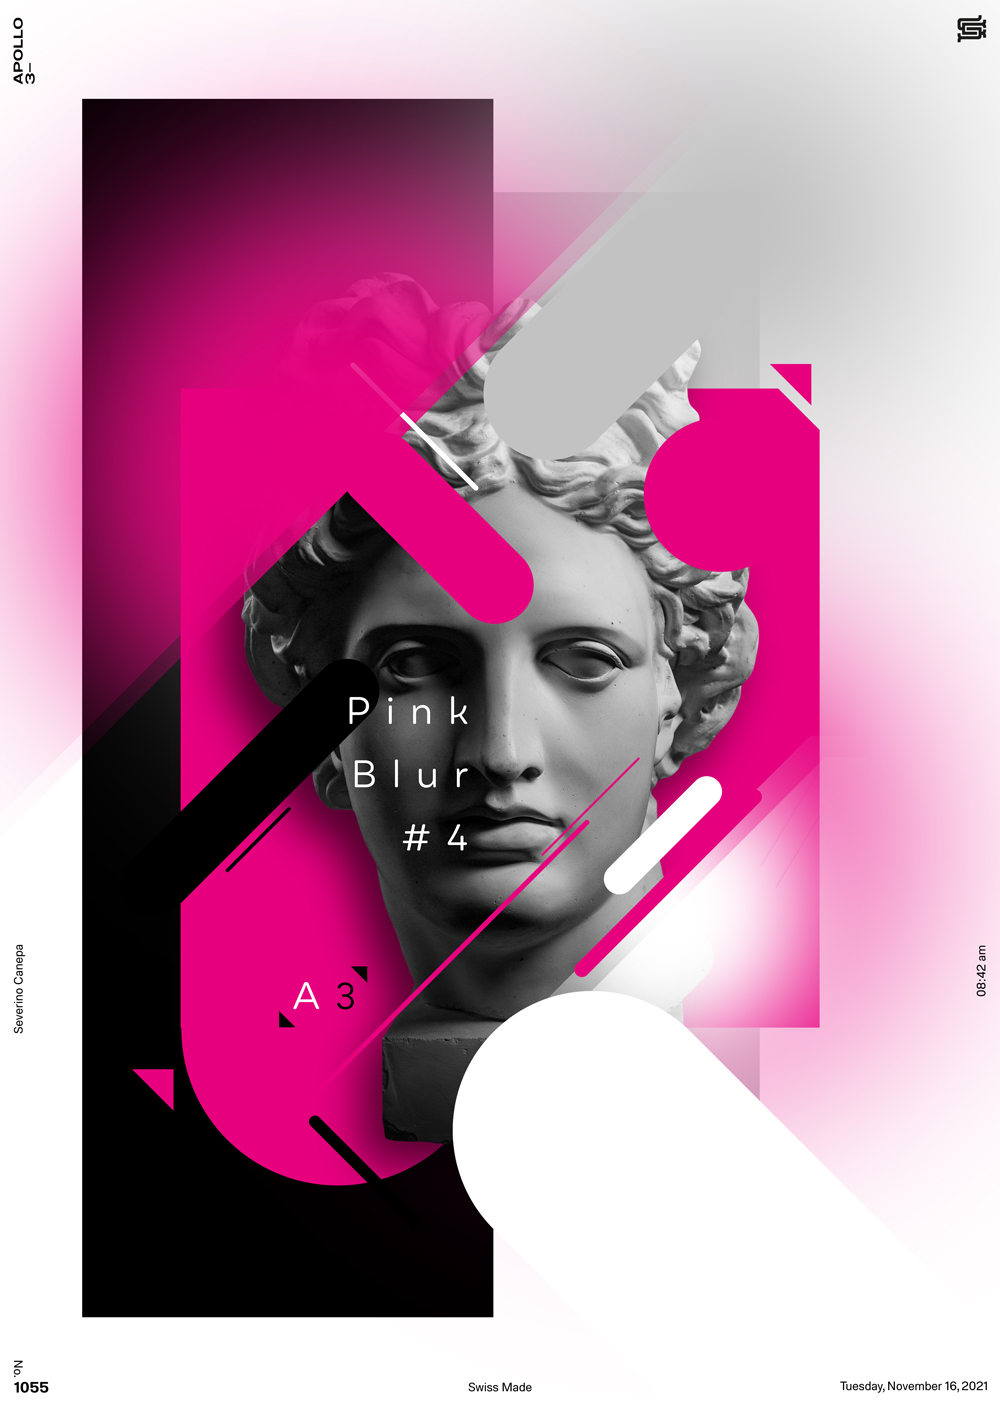 Digital creation I created with Apollo's Statue, typography, and blur gradients